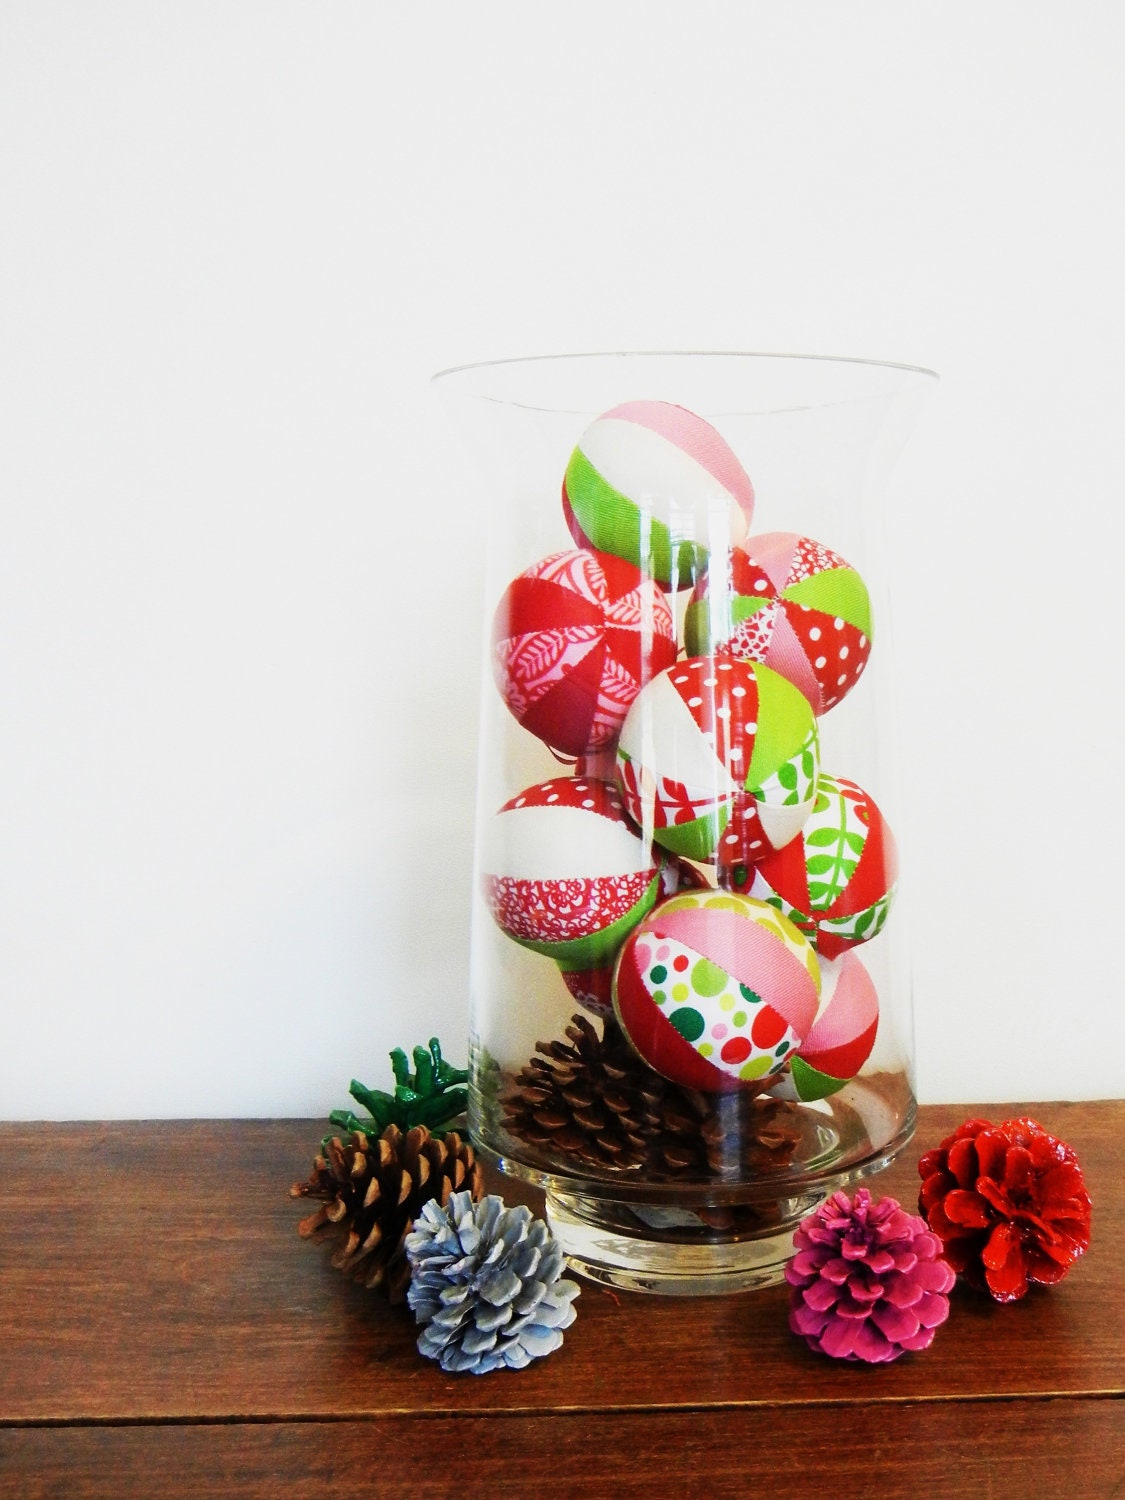 Set of 8 - Whimsical fabric Christmas balls - Home decor, table centerpiece, mantle - red, white, green, pink - Walkervilletextiles